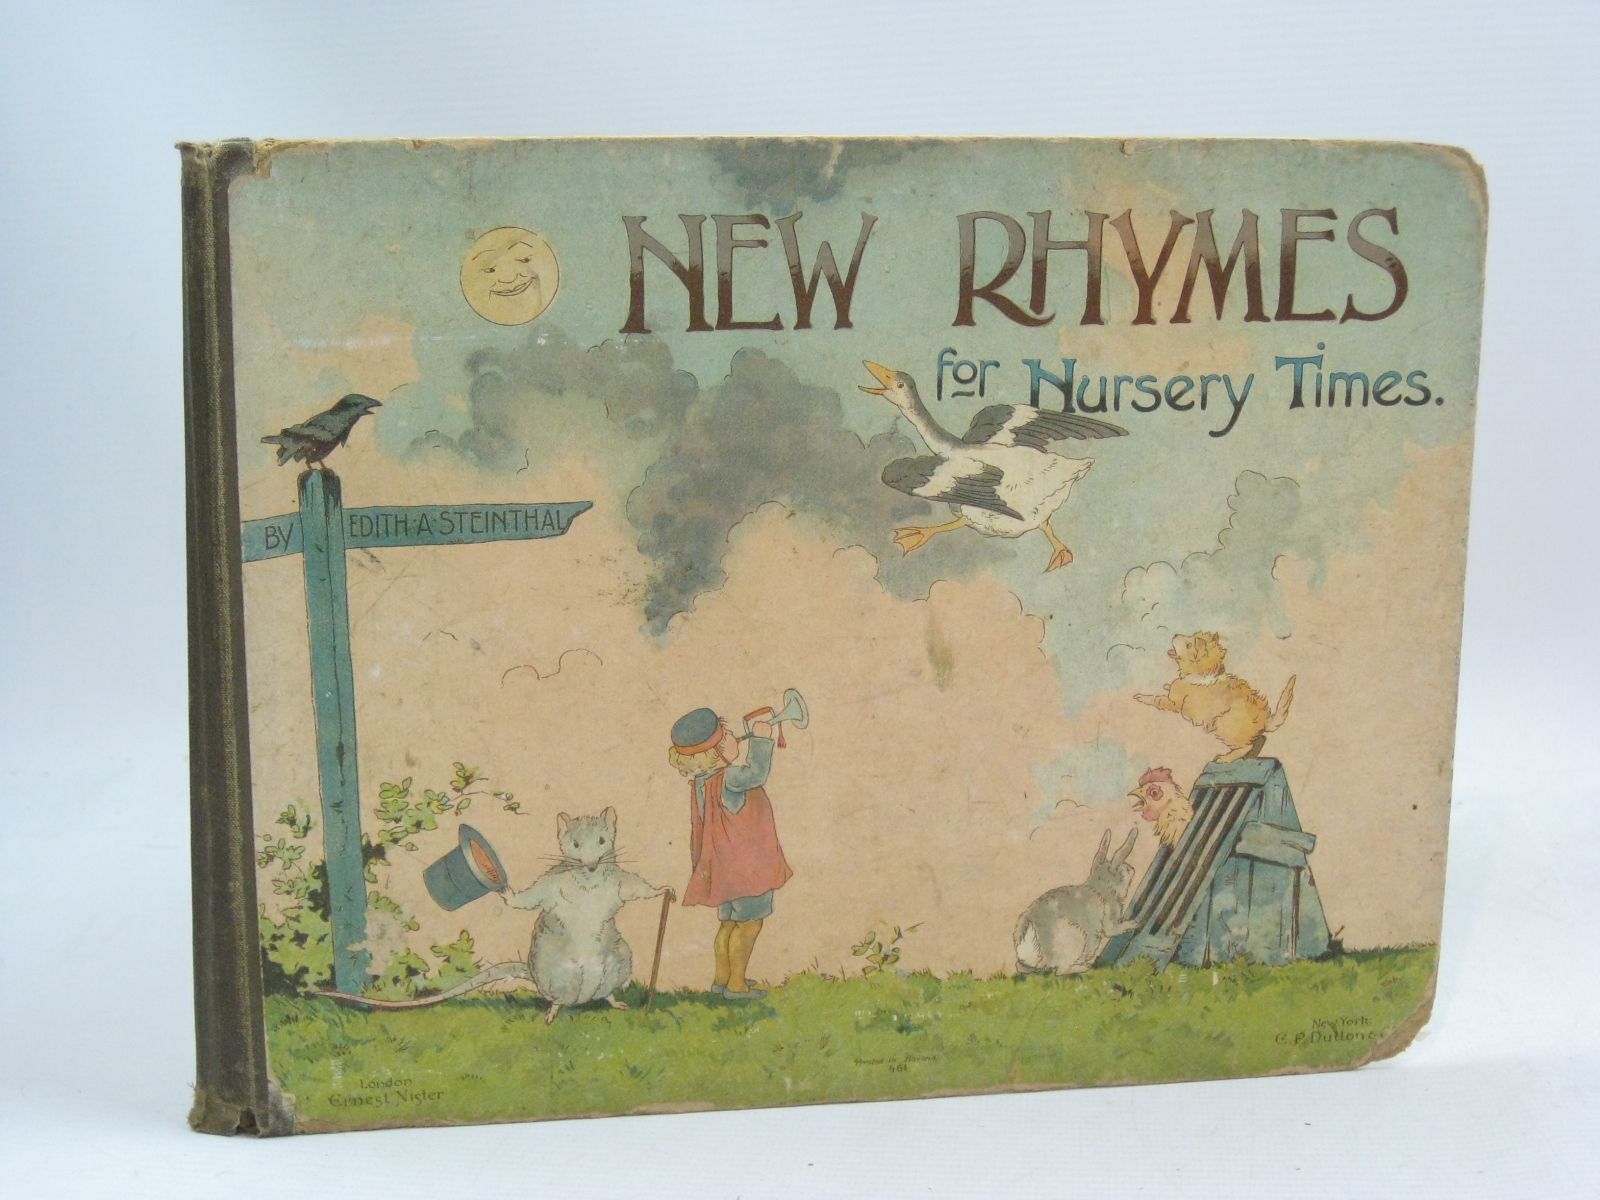 Photo of NEW RHYMES FOR NURSERY TIMES written by Steinthal, Edith A. published by E.P. Dutton & Co. (STOCK CODE: 1505879)  for sale by Stella & Rose's Books